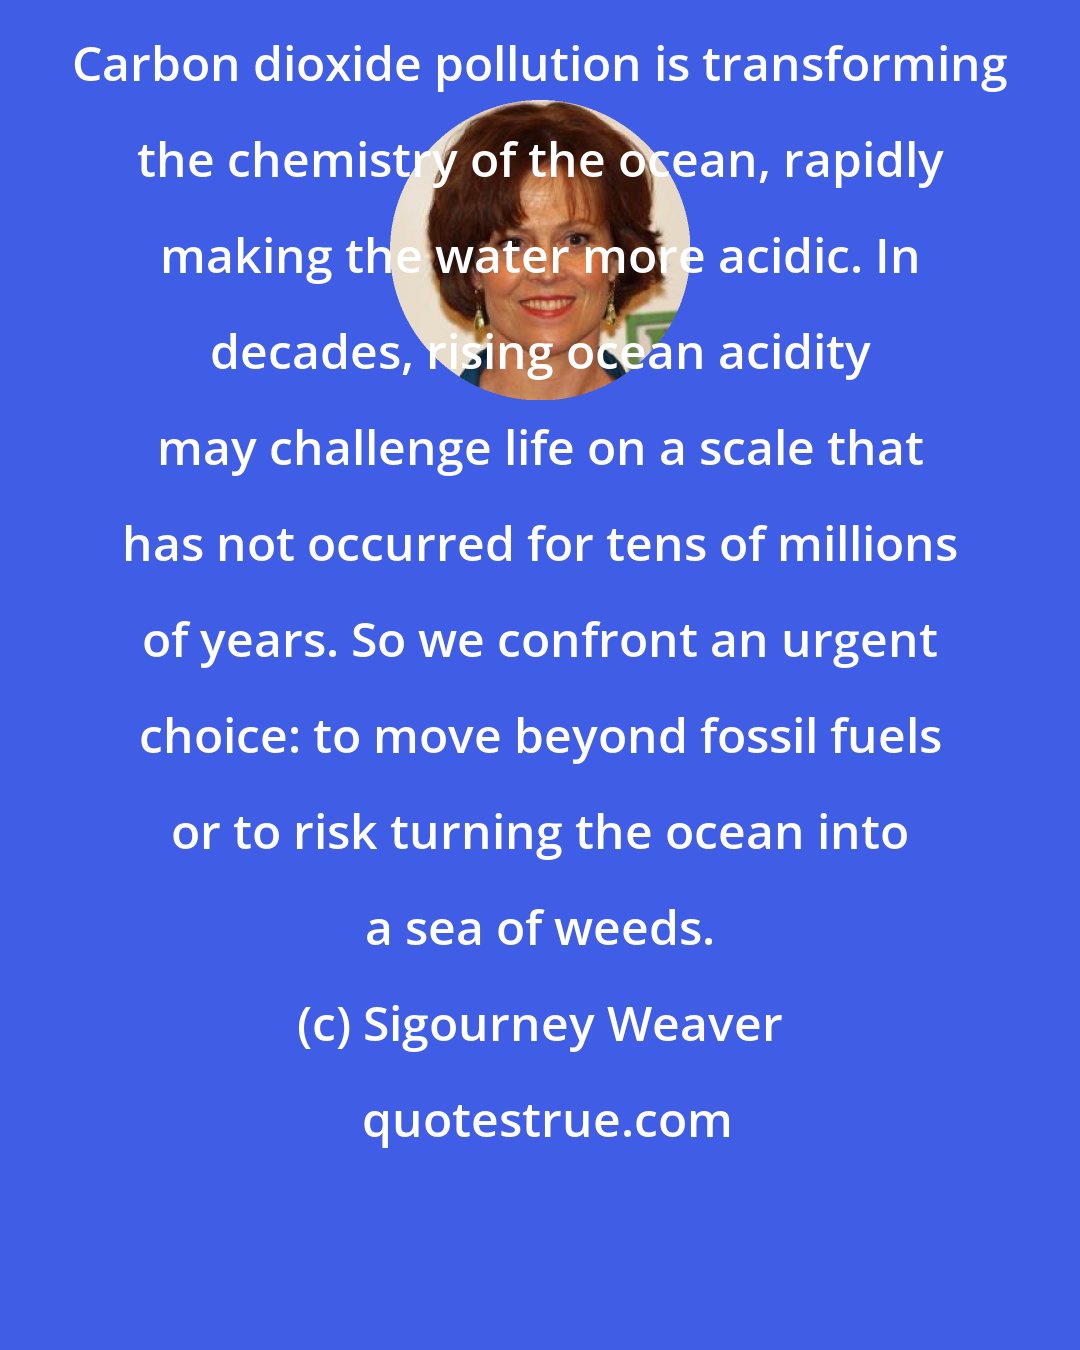 Sigourney Weaver: Carbon dioxide pollution is transforming the chemistry of the ocean, rapidly making the water more acidic. In decades, rising ocean acidity may challenge life on a scale that has not occurred for tens of millions of years. So we confront an urgent choice: to move beyond fossil fuels or to risk turning the ocean into a sea of weeds.